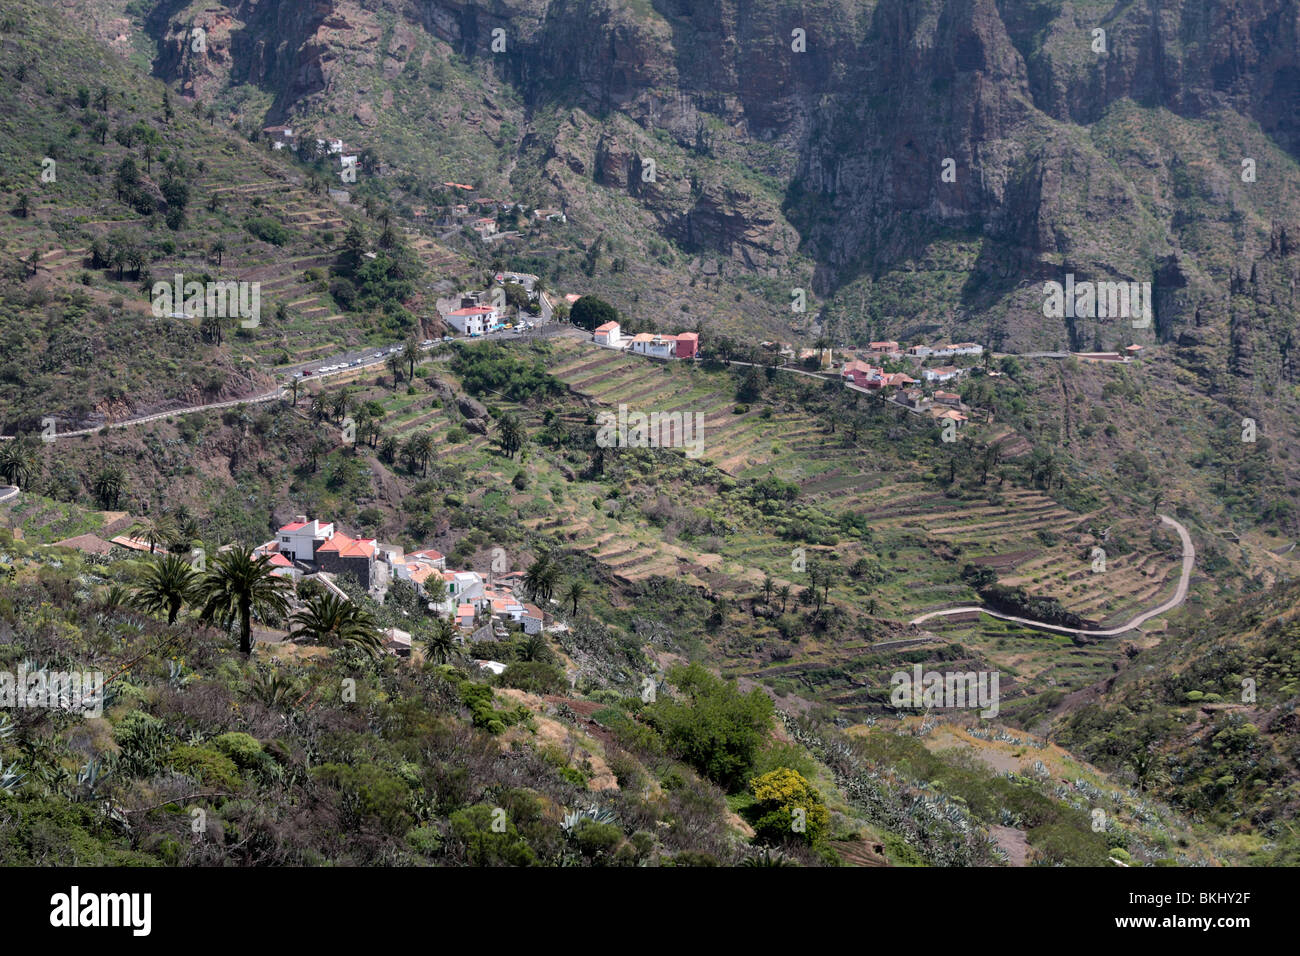 The village of Masca in the barranco de Masca in the Los Gigantes cliffs on Tenerife Canary Islands Spain Europe Stock Photo